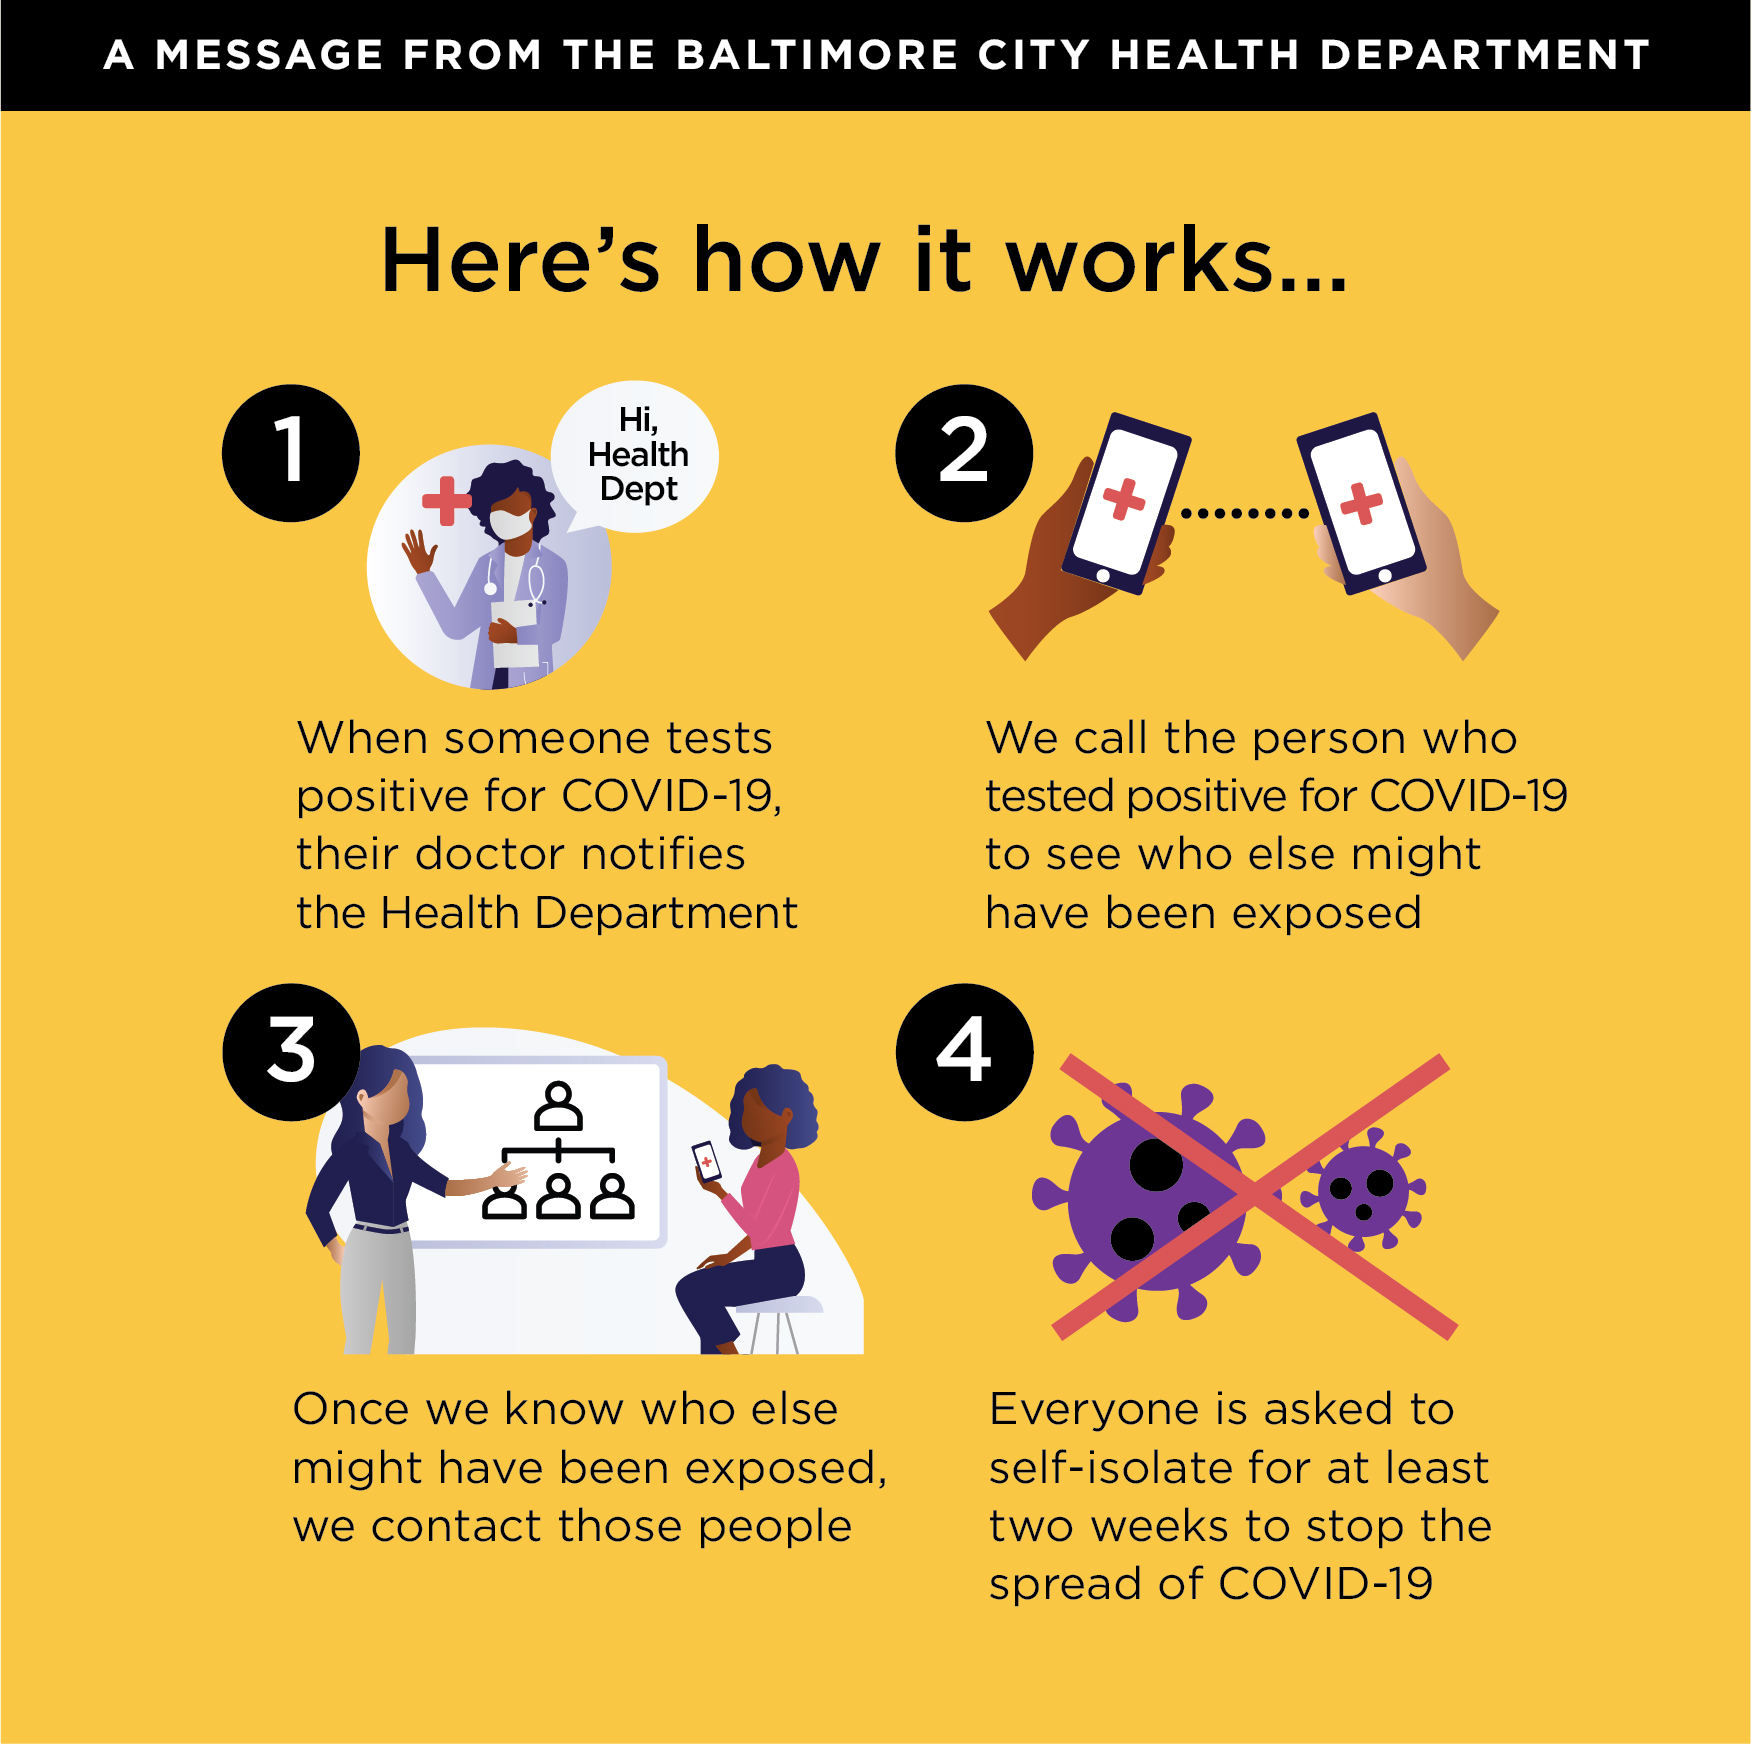 Here's how it works. You'll get a call from the Health Department to talk about your recent movements. Please answer the call! Its important to help stop the spread of disease. 